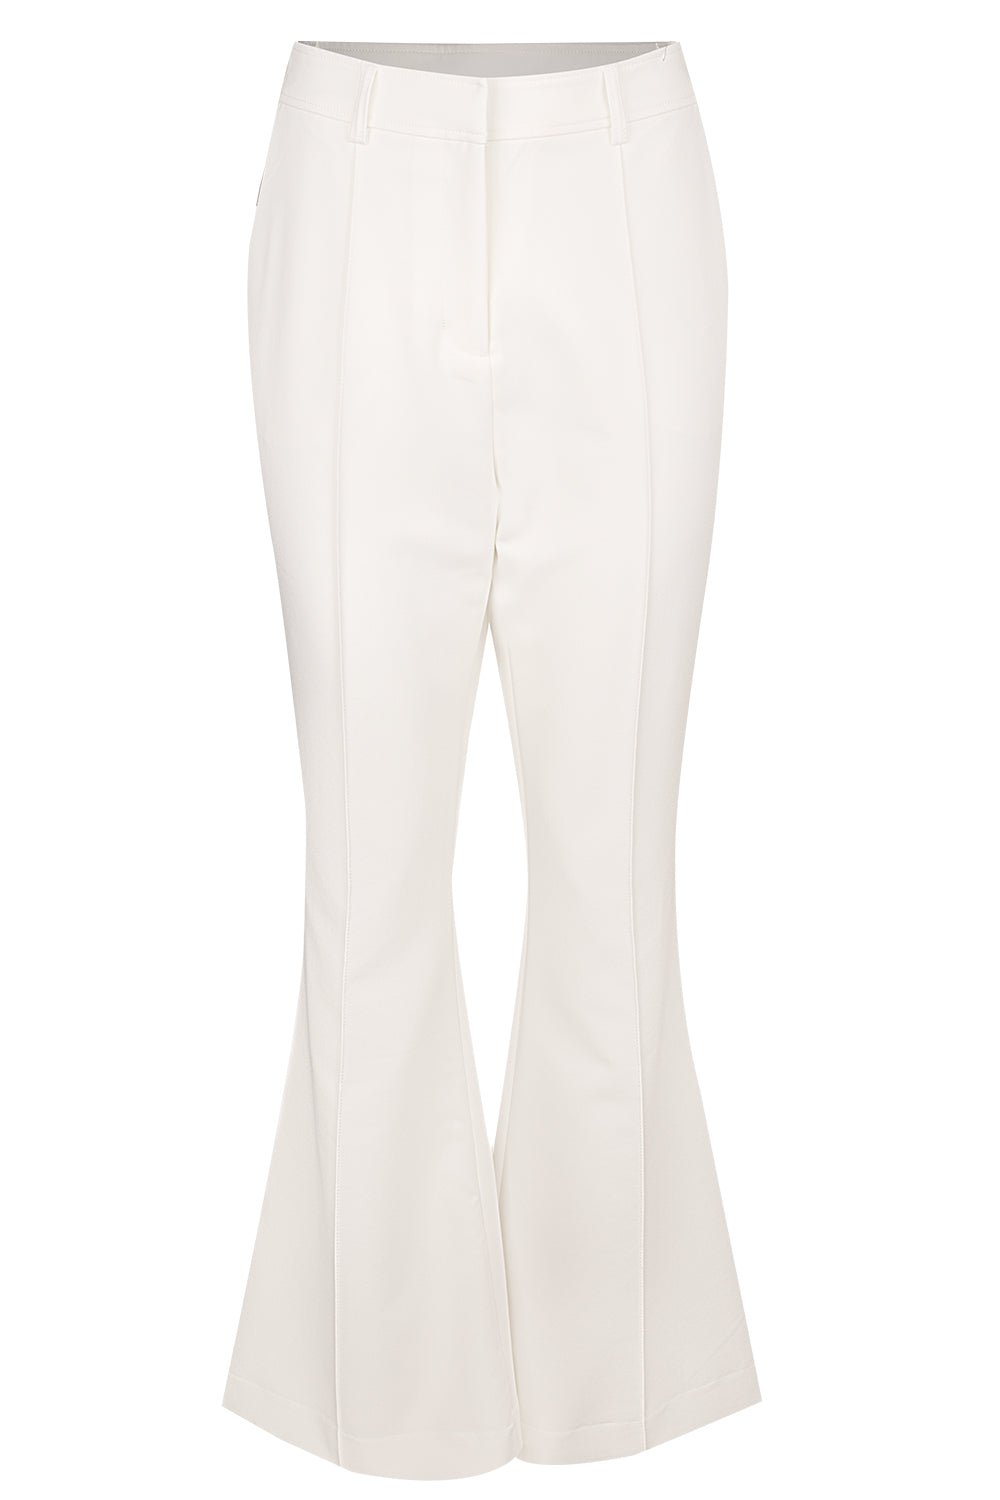 ACLER-Wirra Pant-